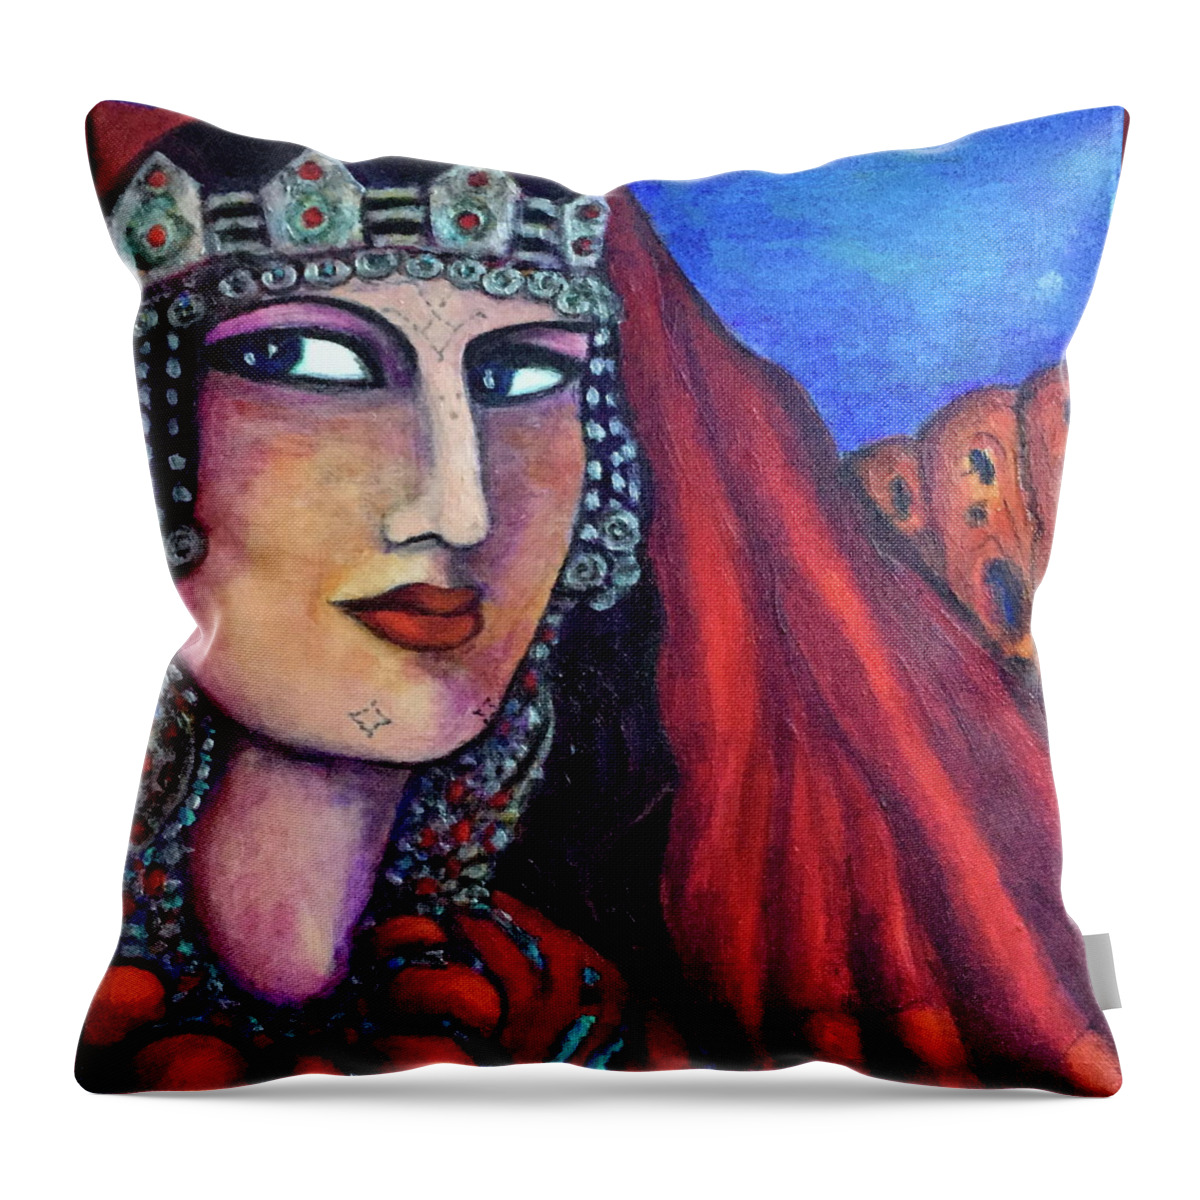 Original Throw Pillow featuring the painting Amazigh Beauty 1 by Rae Chichilnitsky